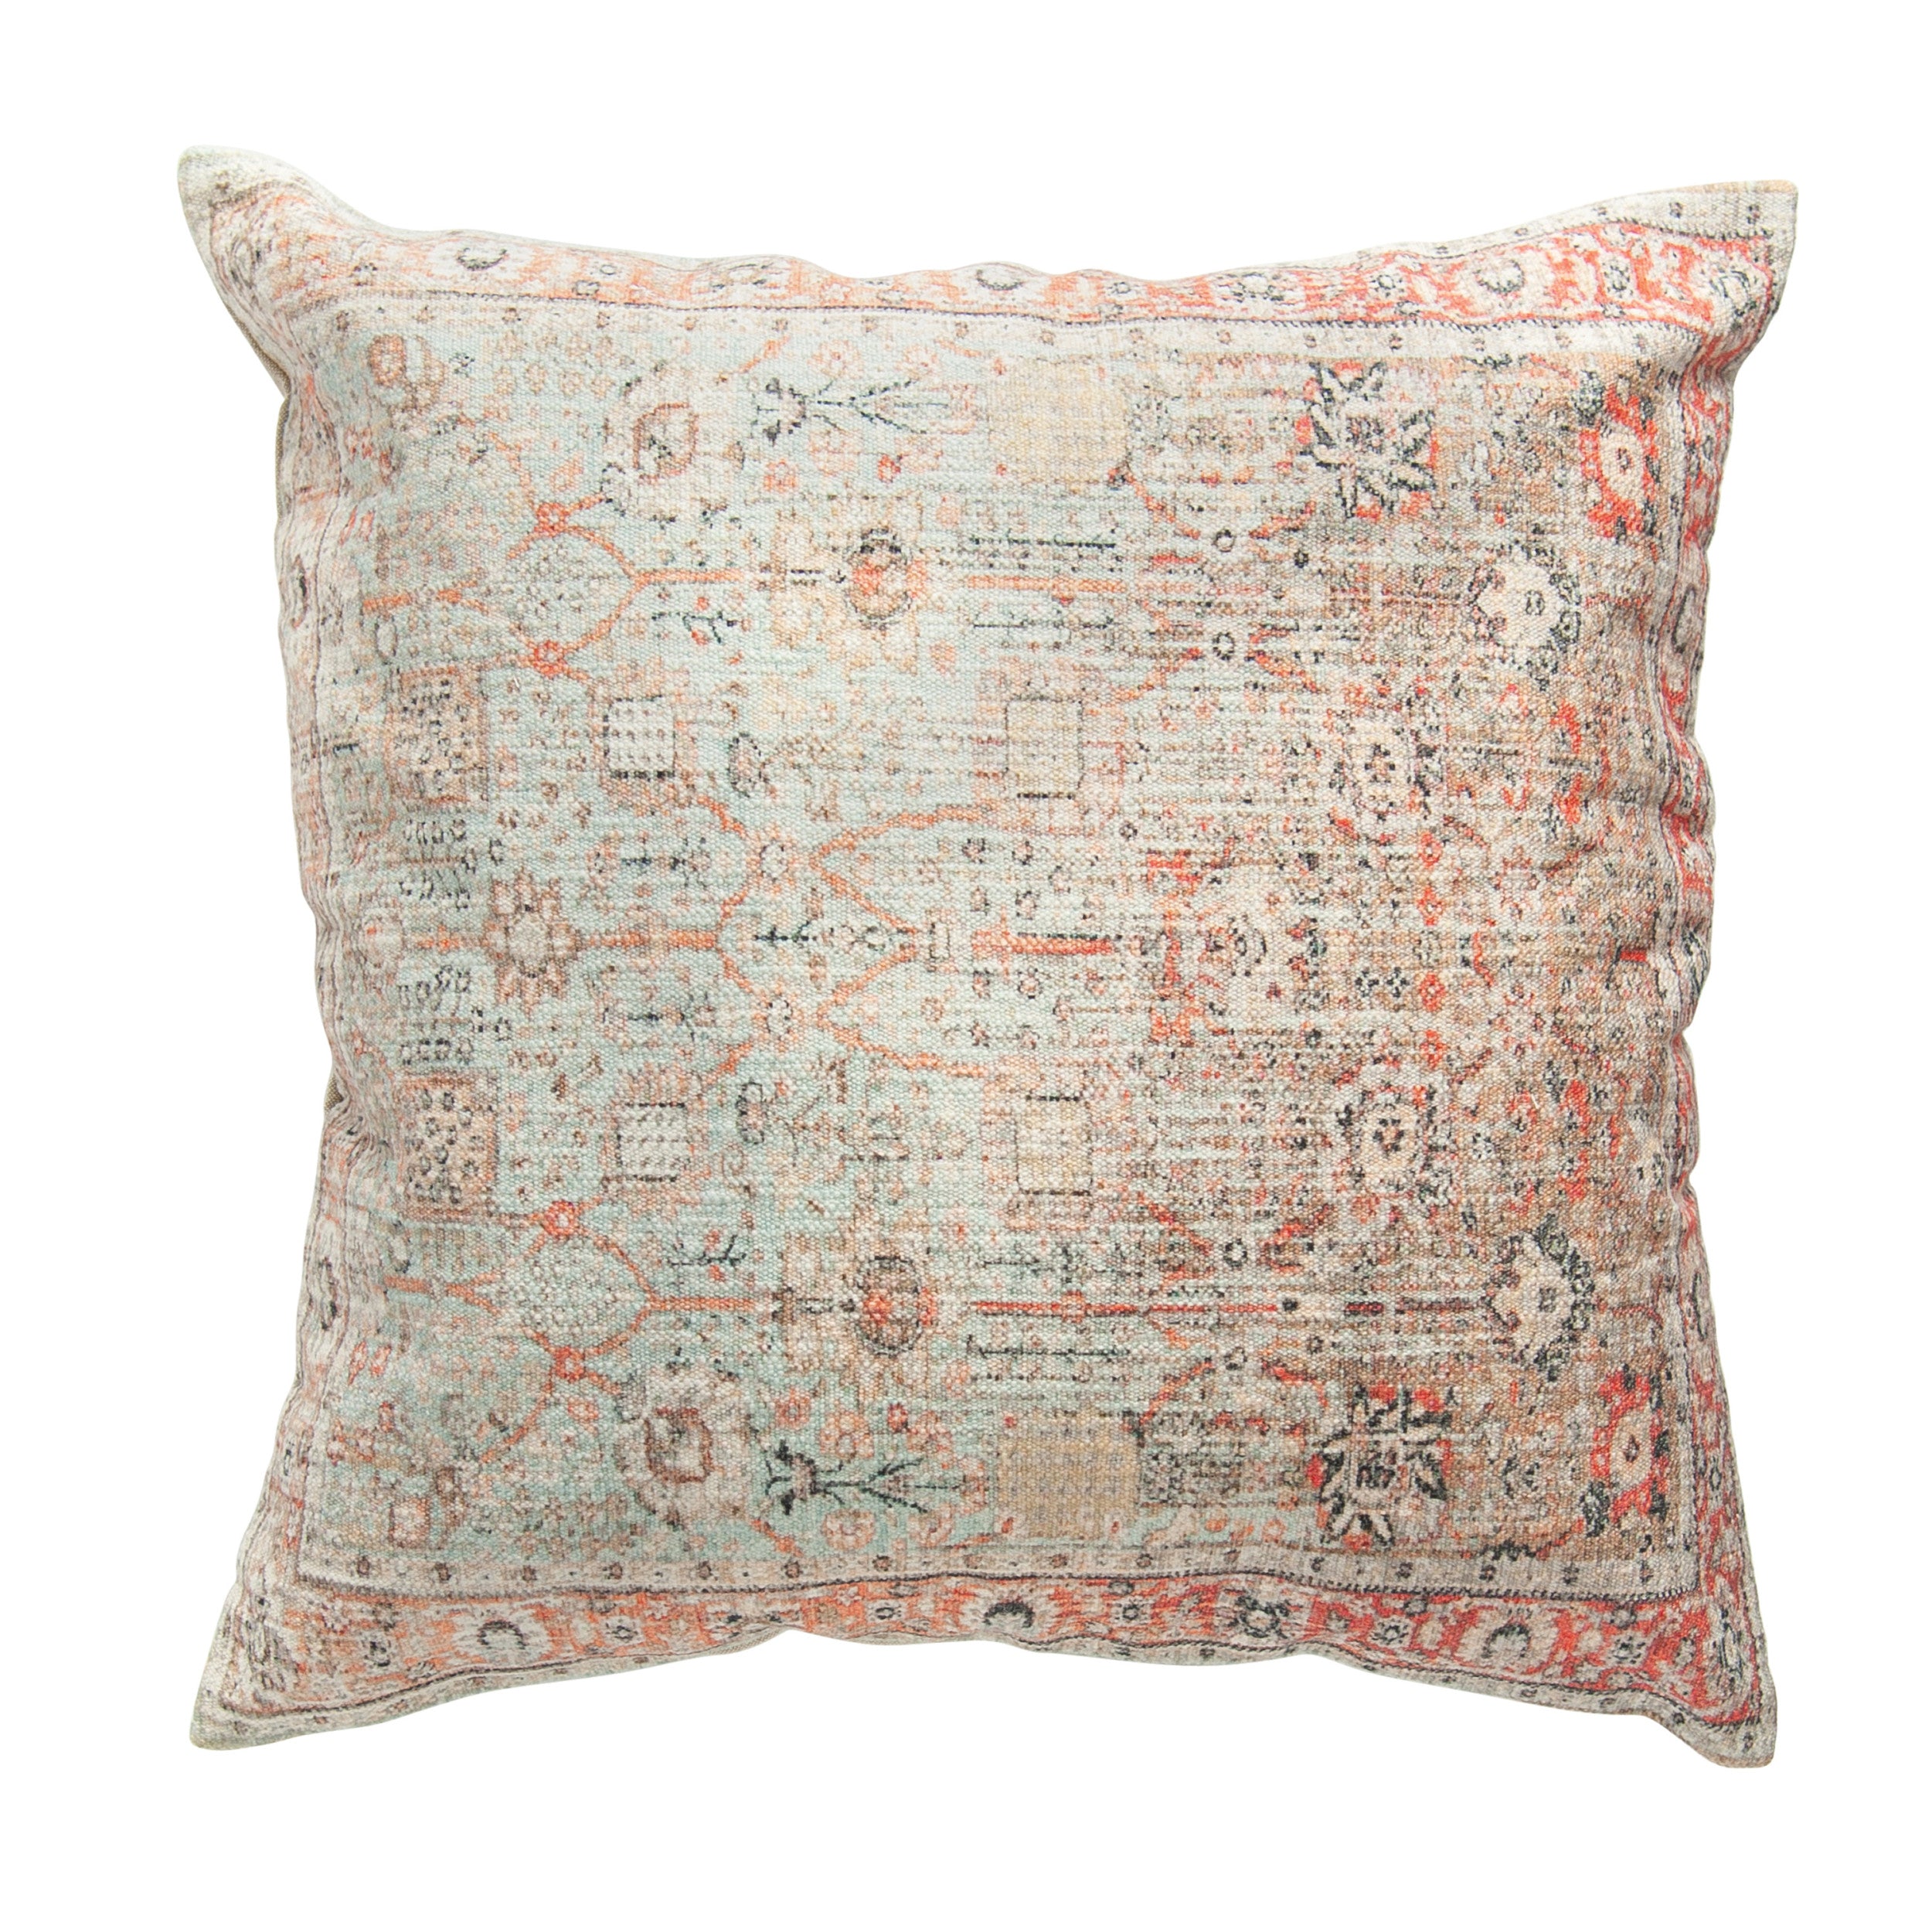 Distressed 24" Square Printed Textile Pillow